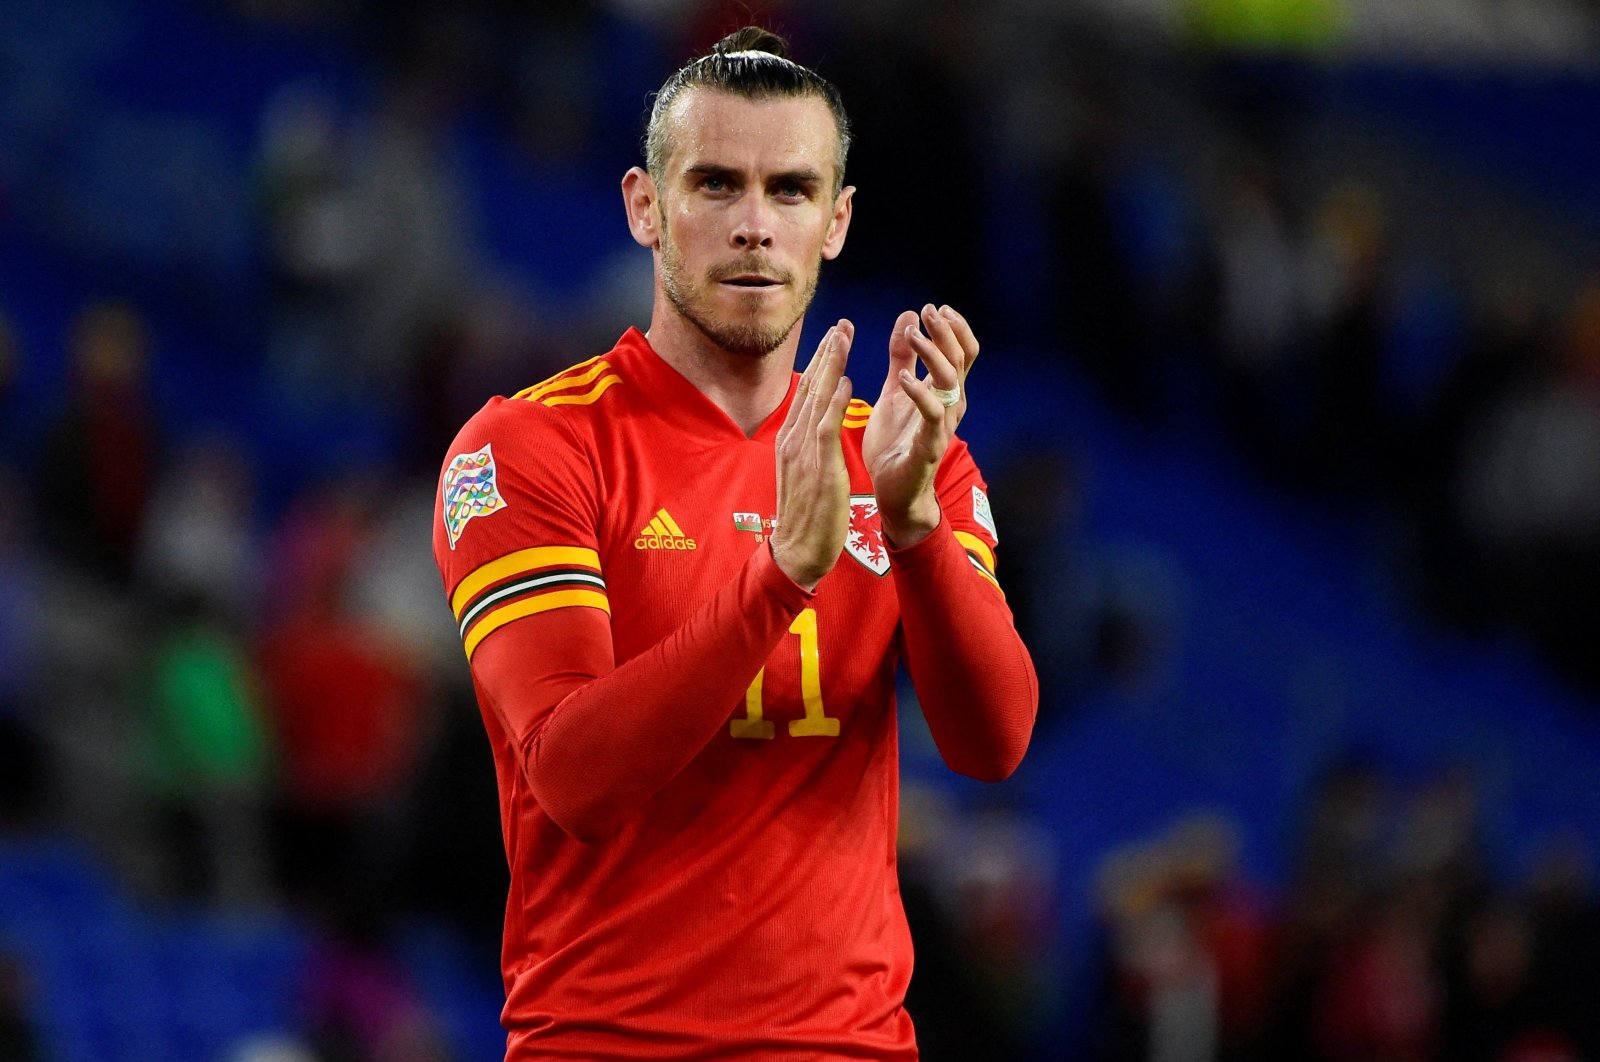 Wales&#039; Gareth Bale applauds fans after Nations League match against the Netherlands, Cardiff, Wales, June 8, 2022. (Reuters Photo)